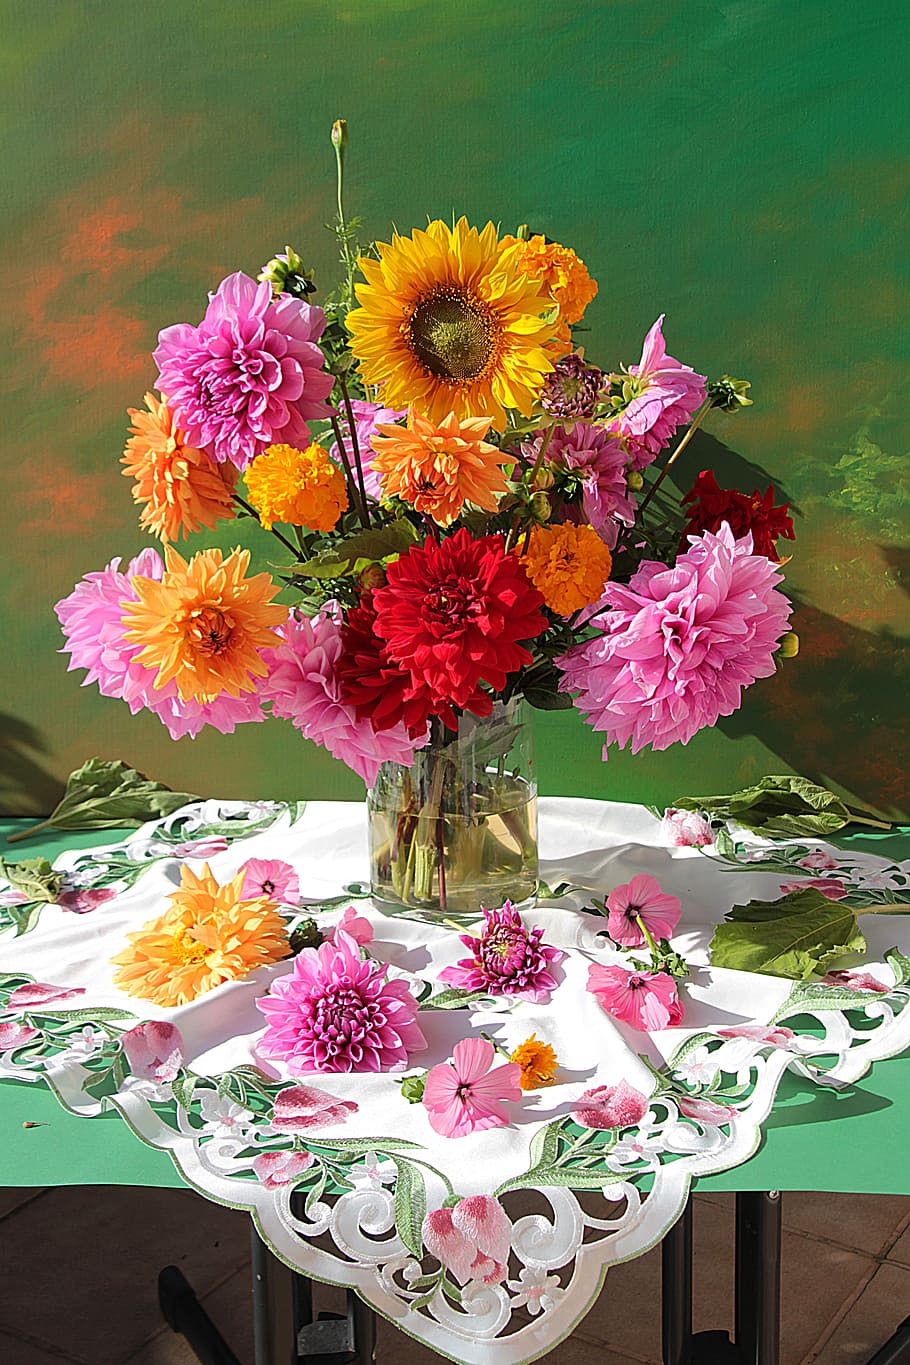 yellow, sunflowers, red, pink, dahlias, clear, vase painting, still life, blossom, bloom